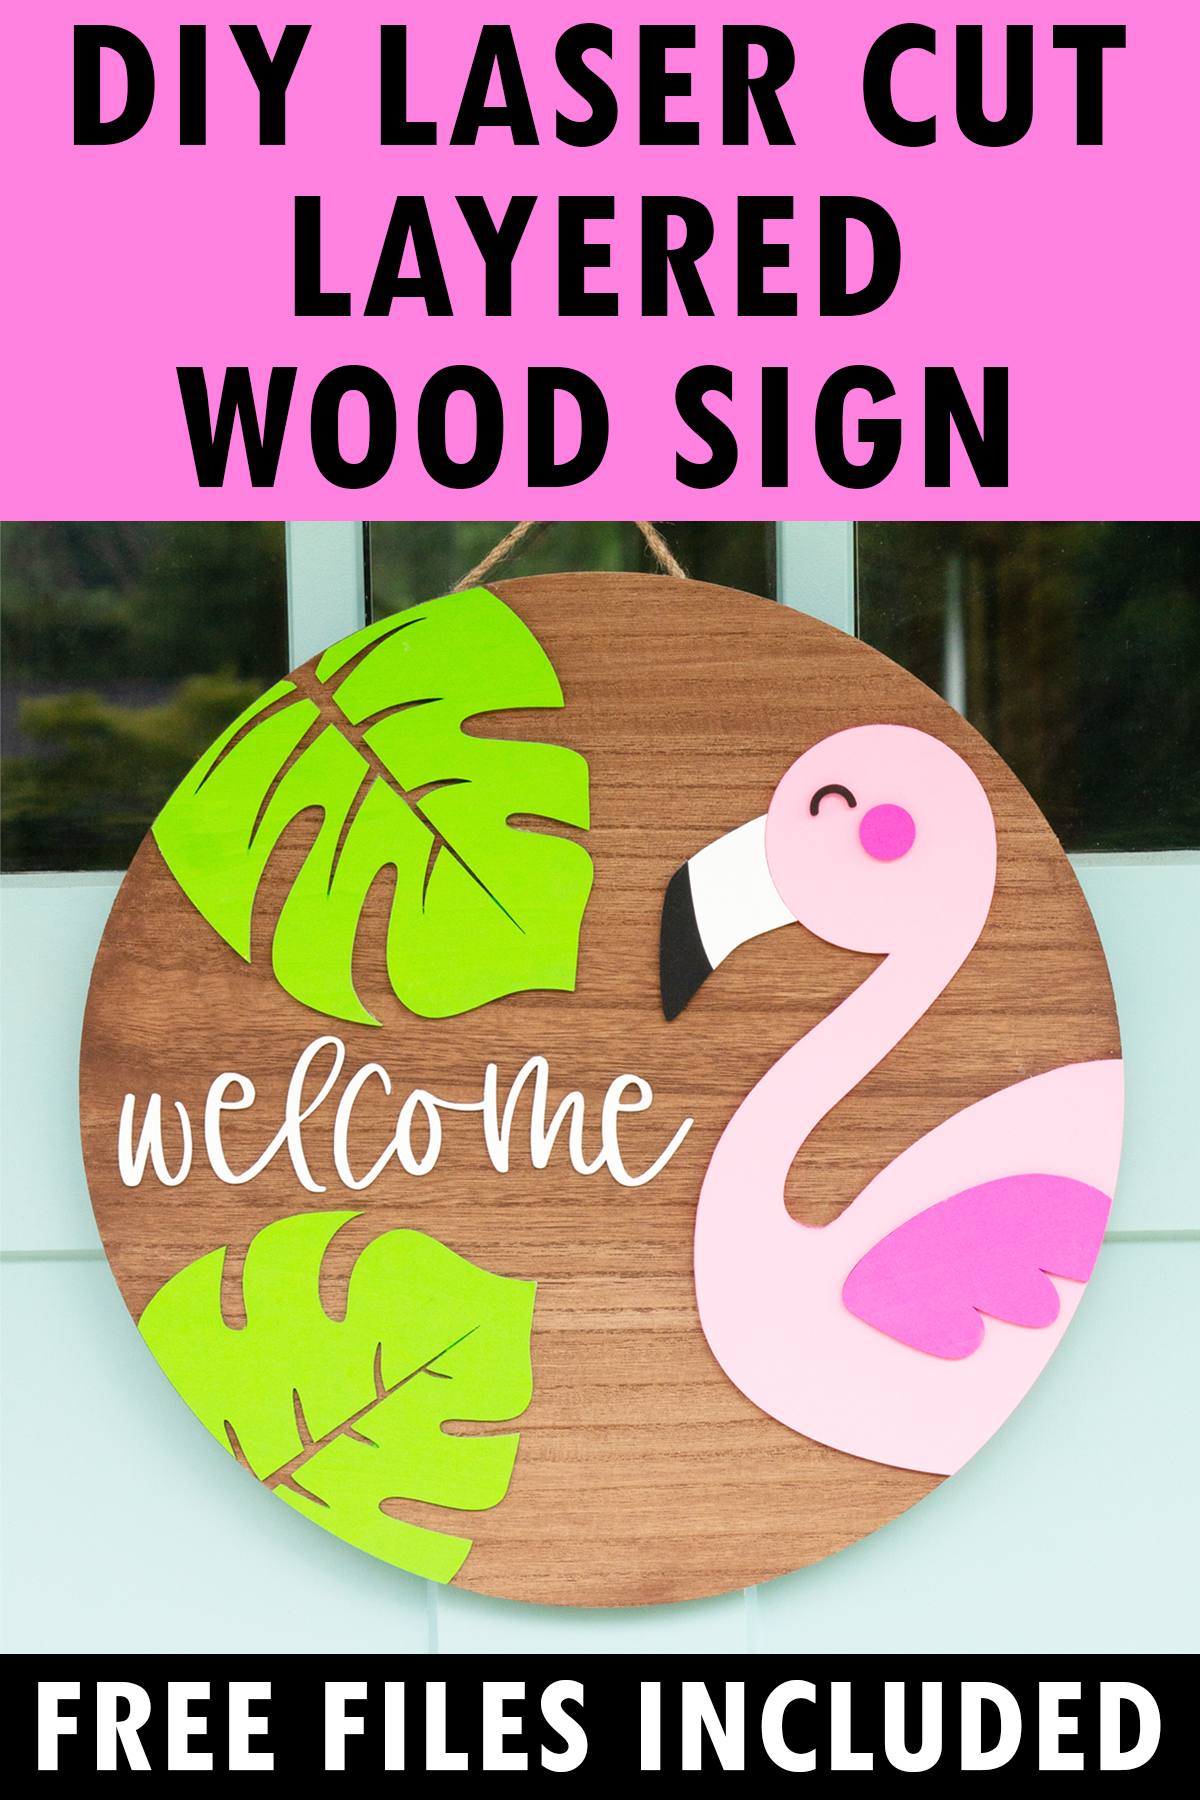 At the top it says DIY laser cut layered wood sign. Below that, the image shows the completed layered wood sign with the free summer welcome sign SVG file. It is a flamingo, two tropical leaves, and the word welcome. At the bottom it says free files included.